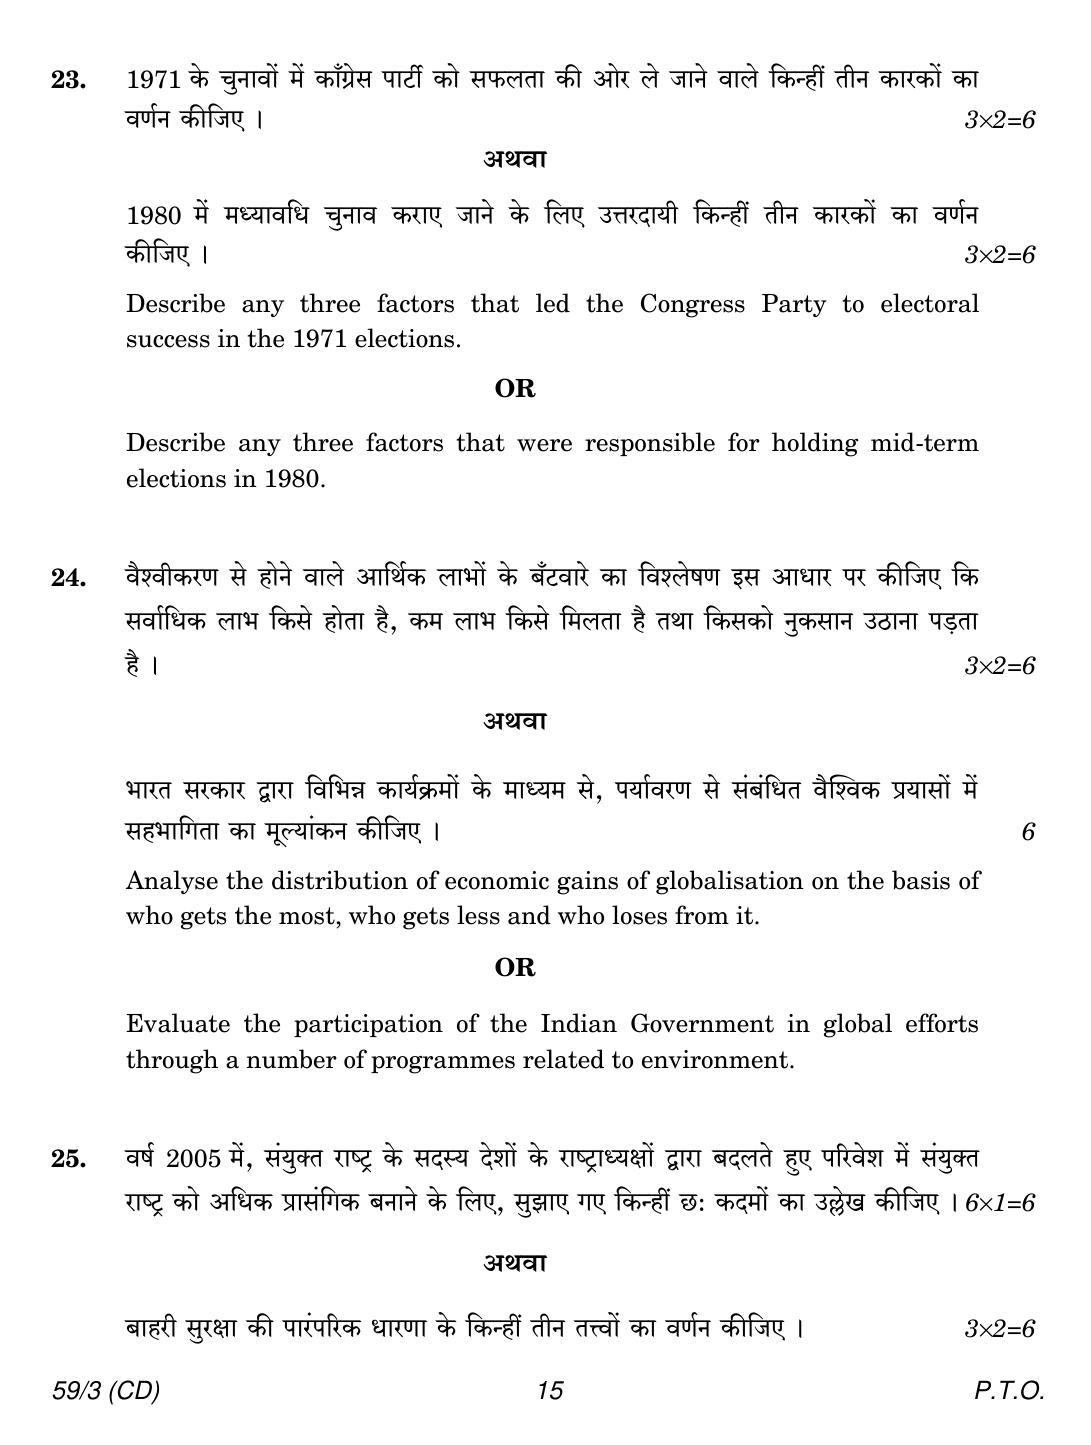 CBSE Class 12 59-3 POLITICAL SCIENCE CD 2018 Question Paper - Page 15